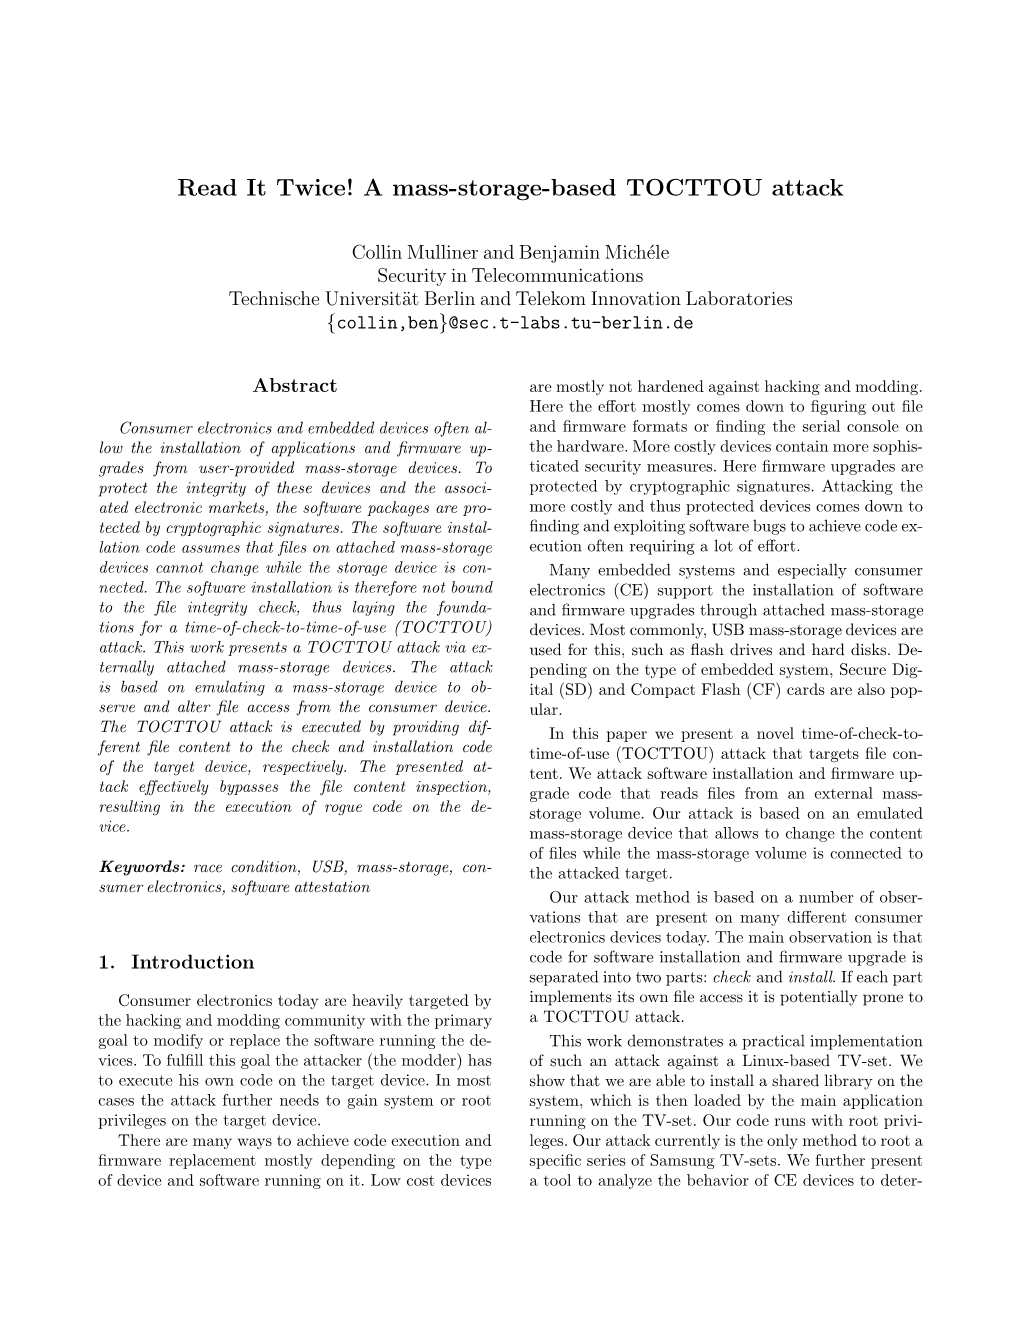 A Mass-Storage-Based TOCTTOU Attack